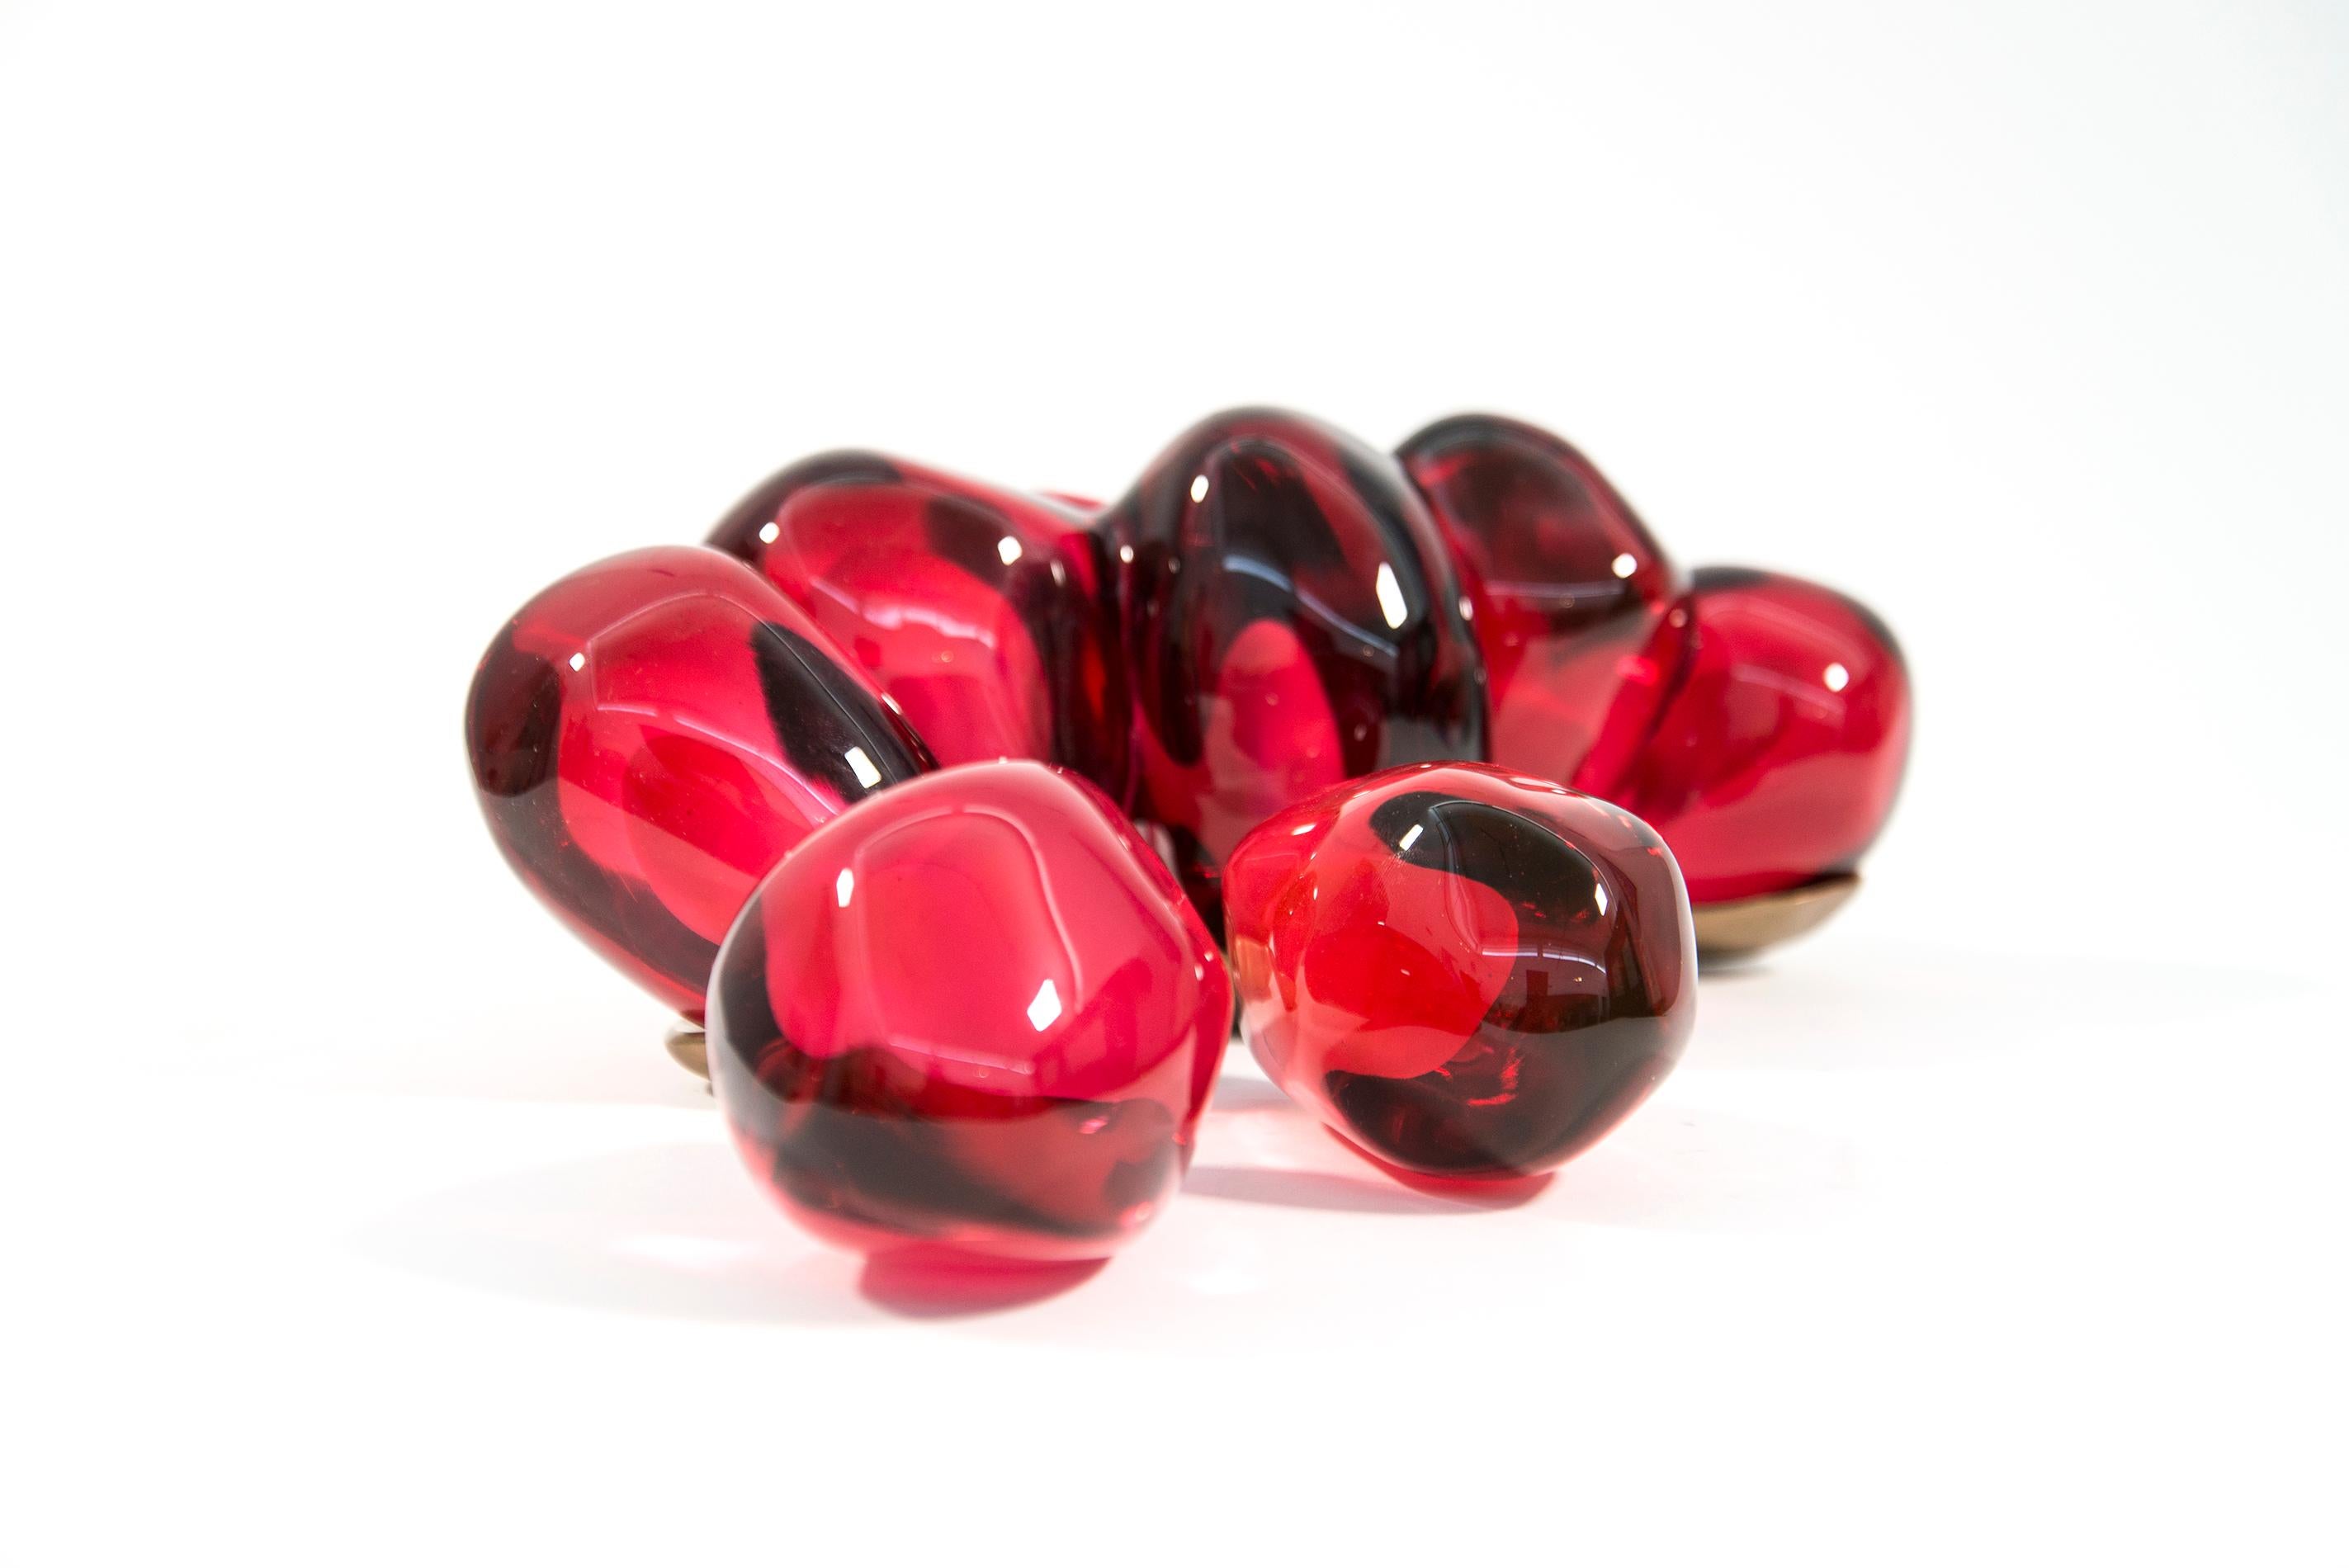 Amaranth and raspberry coloured glass sculpture, referencing the idea of the sensual nature of a pomegranate, the seeds nestled in a bronze base and casing. Vamvakas Lay uses pomegranate imagery, often combined with bronze, to explore the ancient